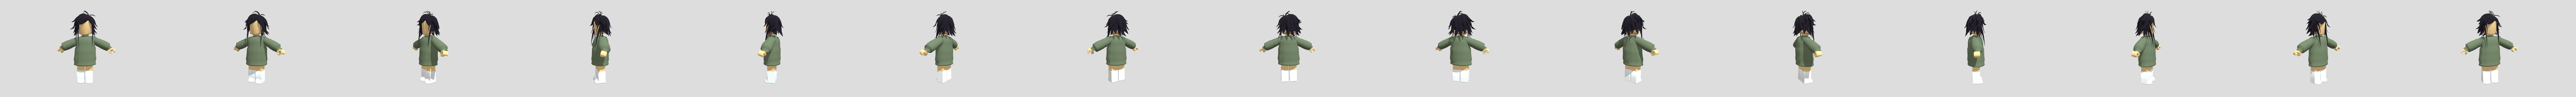 Roblox Girl 3d Model By Awesomeambz Awesomeambz 0afc20a - roblox military girl